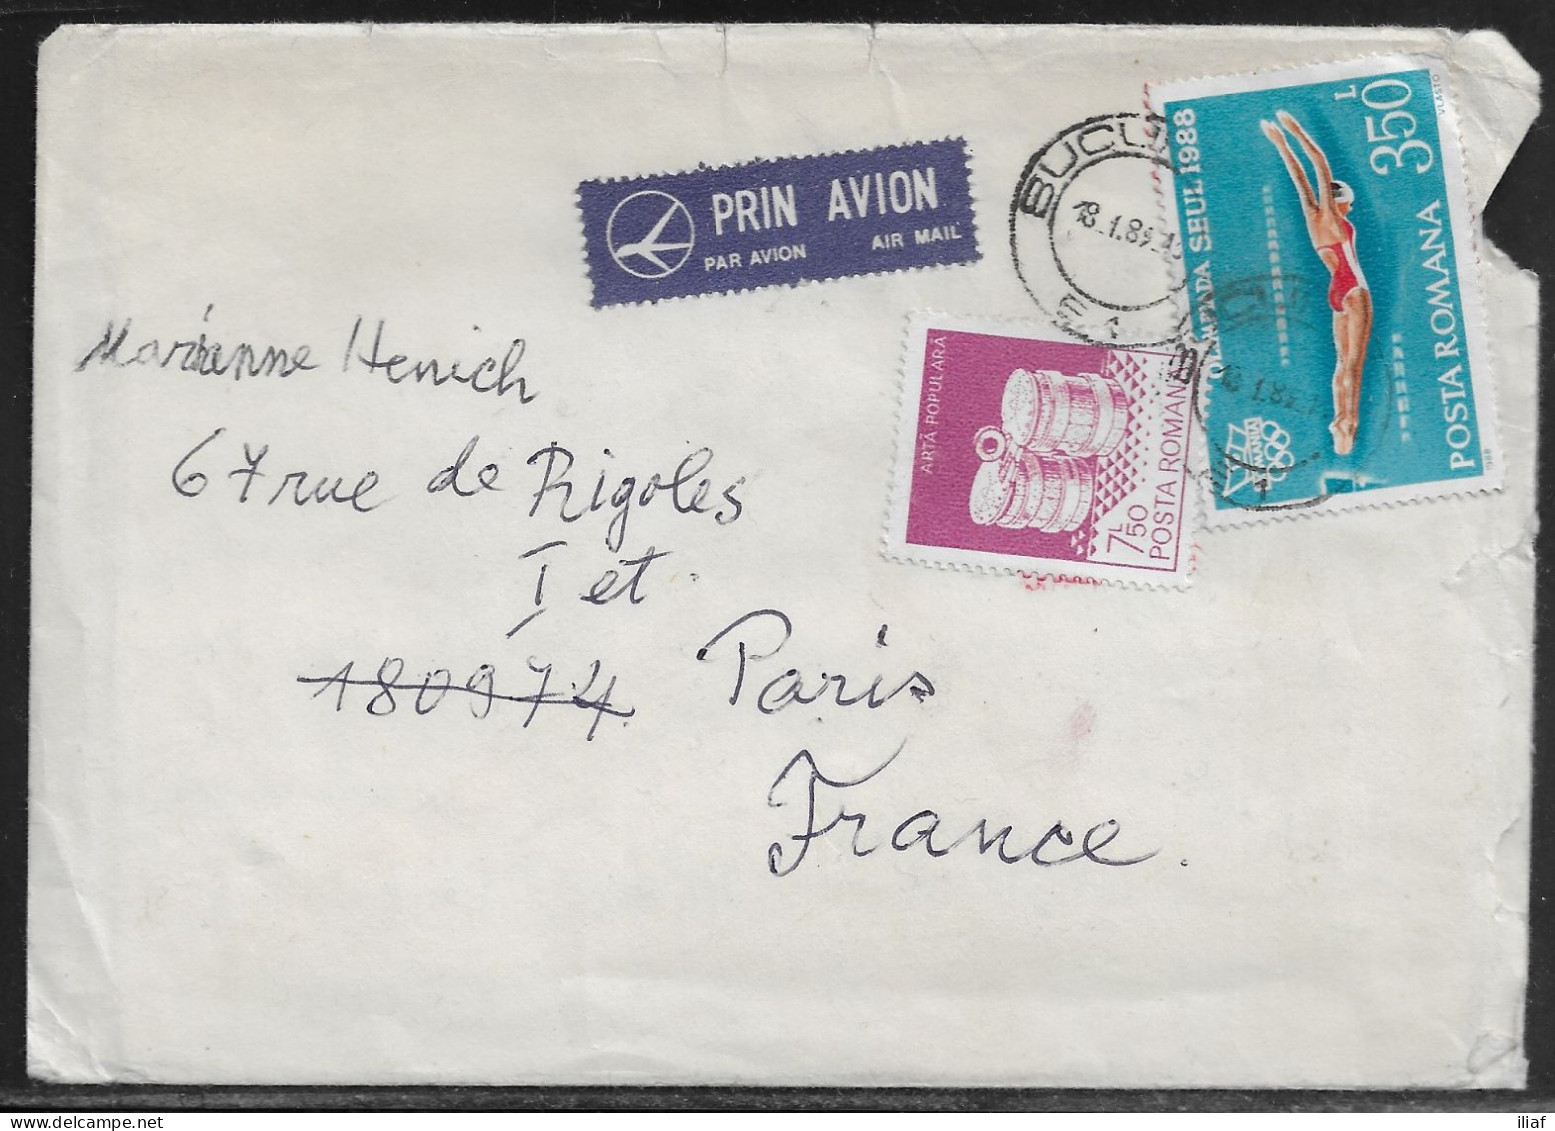 Romania. Stamps Sc. 3112, 3530 On Air Mail Letter, Sent From Bucharest On 18.01.1989 To France. Letter Inside - Brieven En Documenten